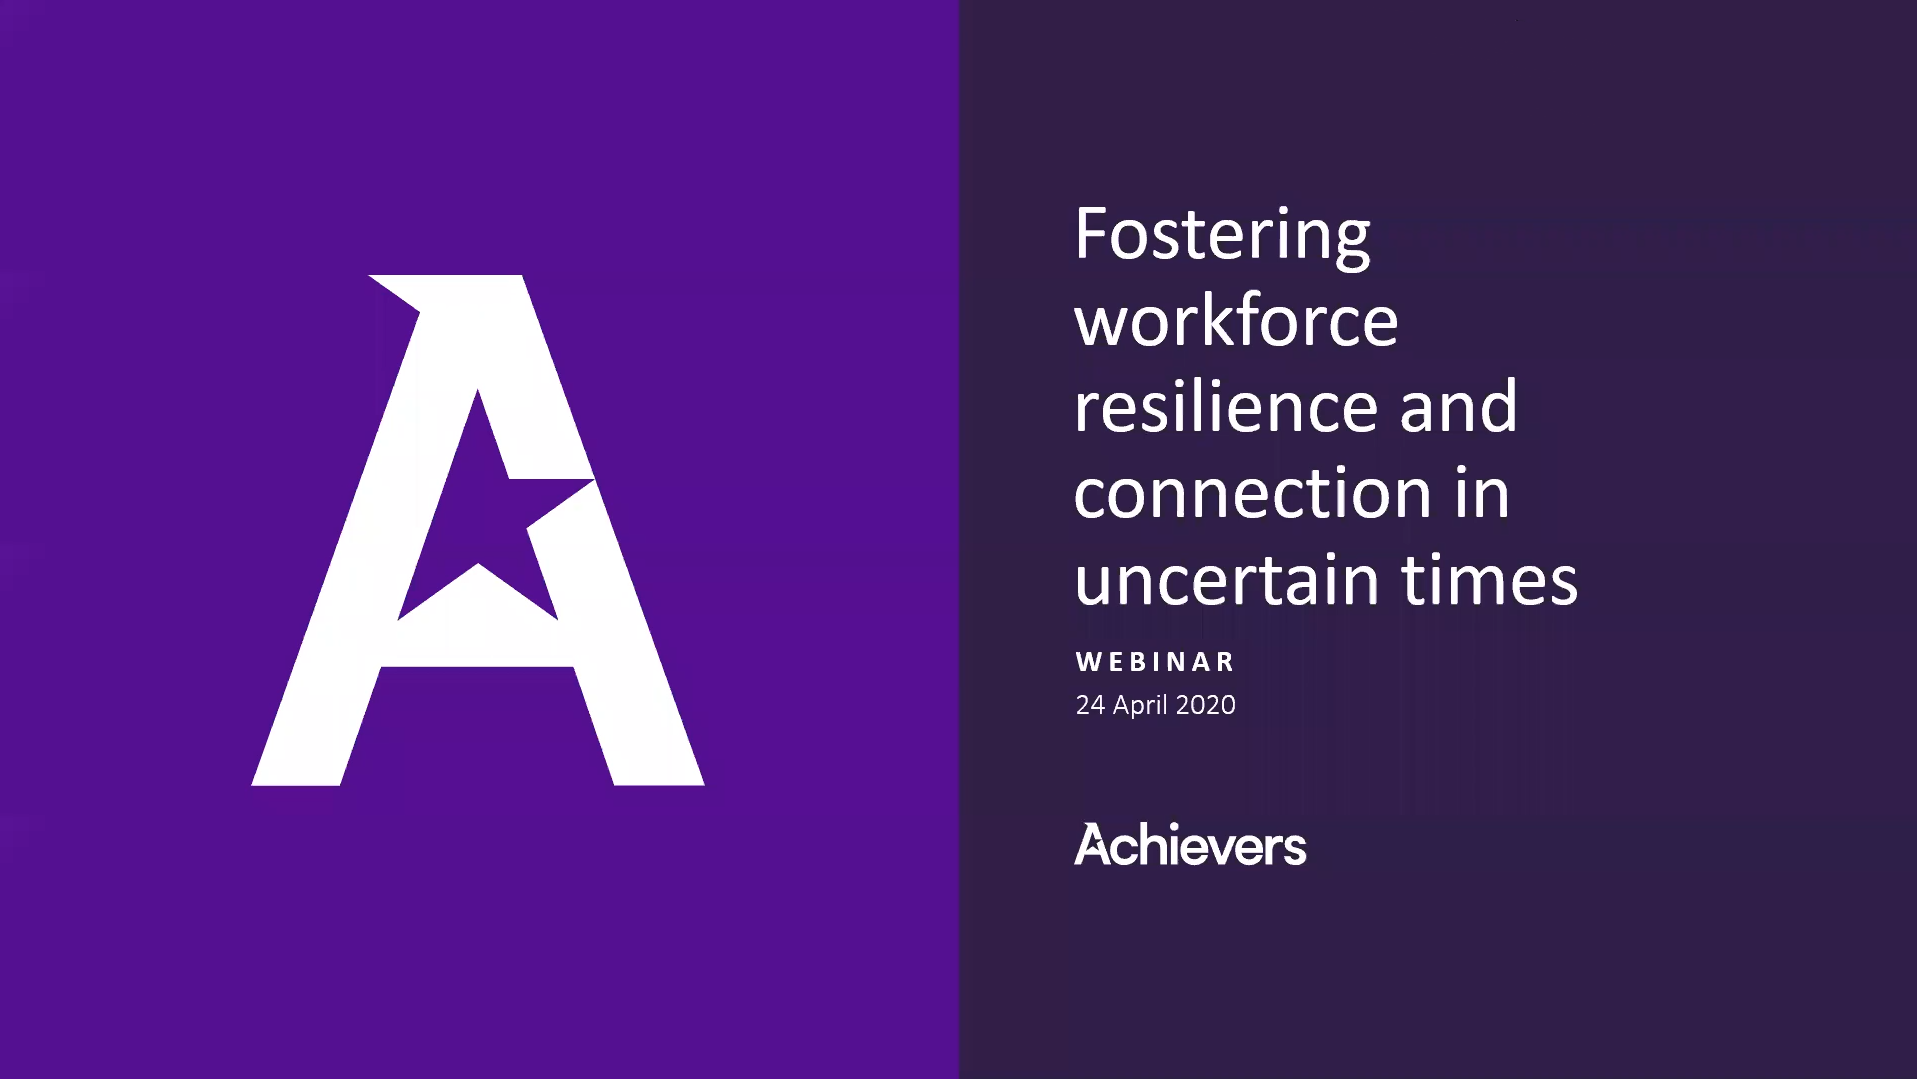 Fostering workplace resilience and connection during COVID-19